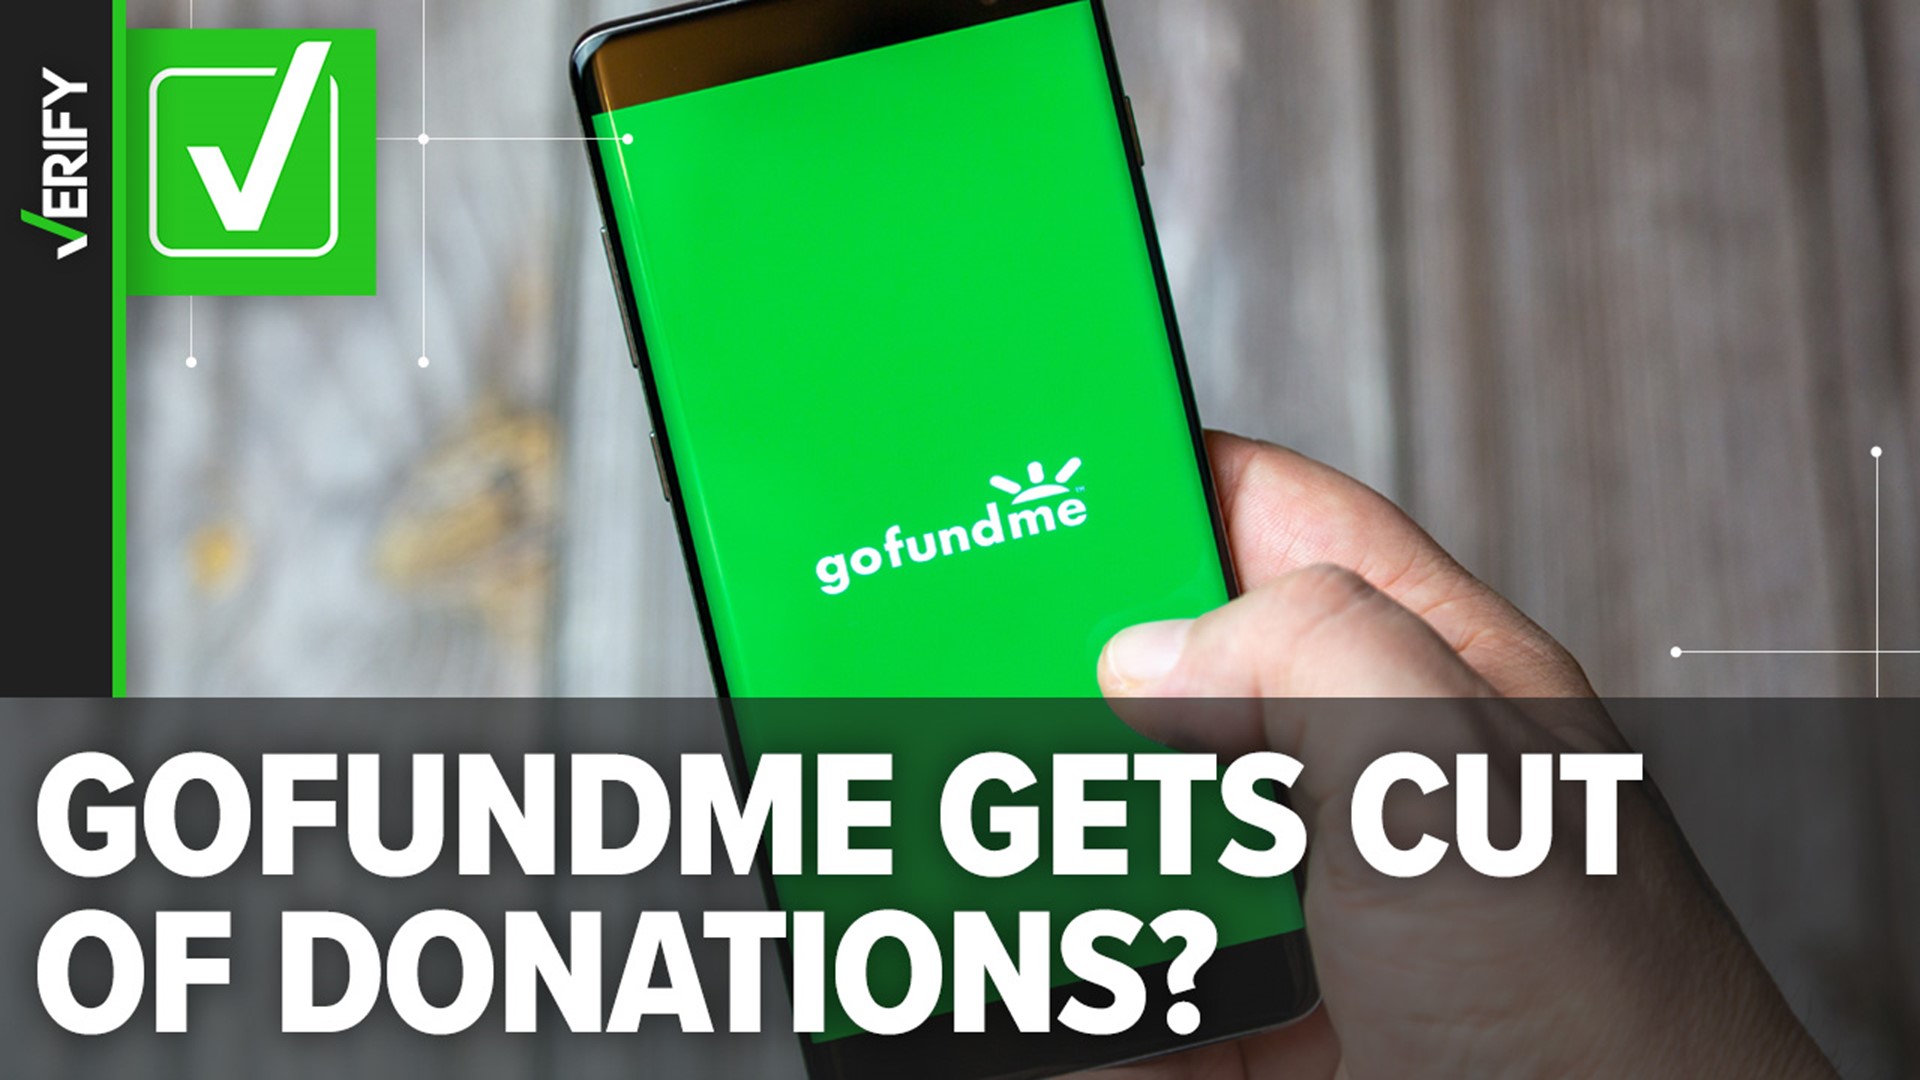 GoFundMe does get a cut of the money donated to fundraisers. But that’s not an uncommon practice for crowdfunding websites.